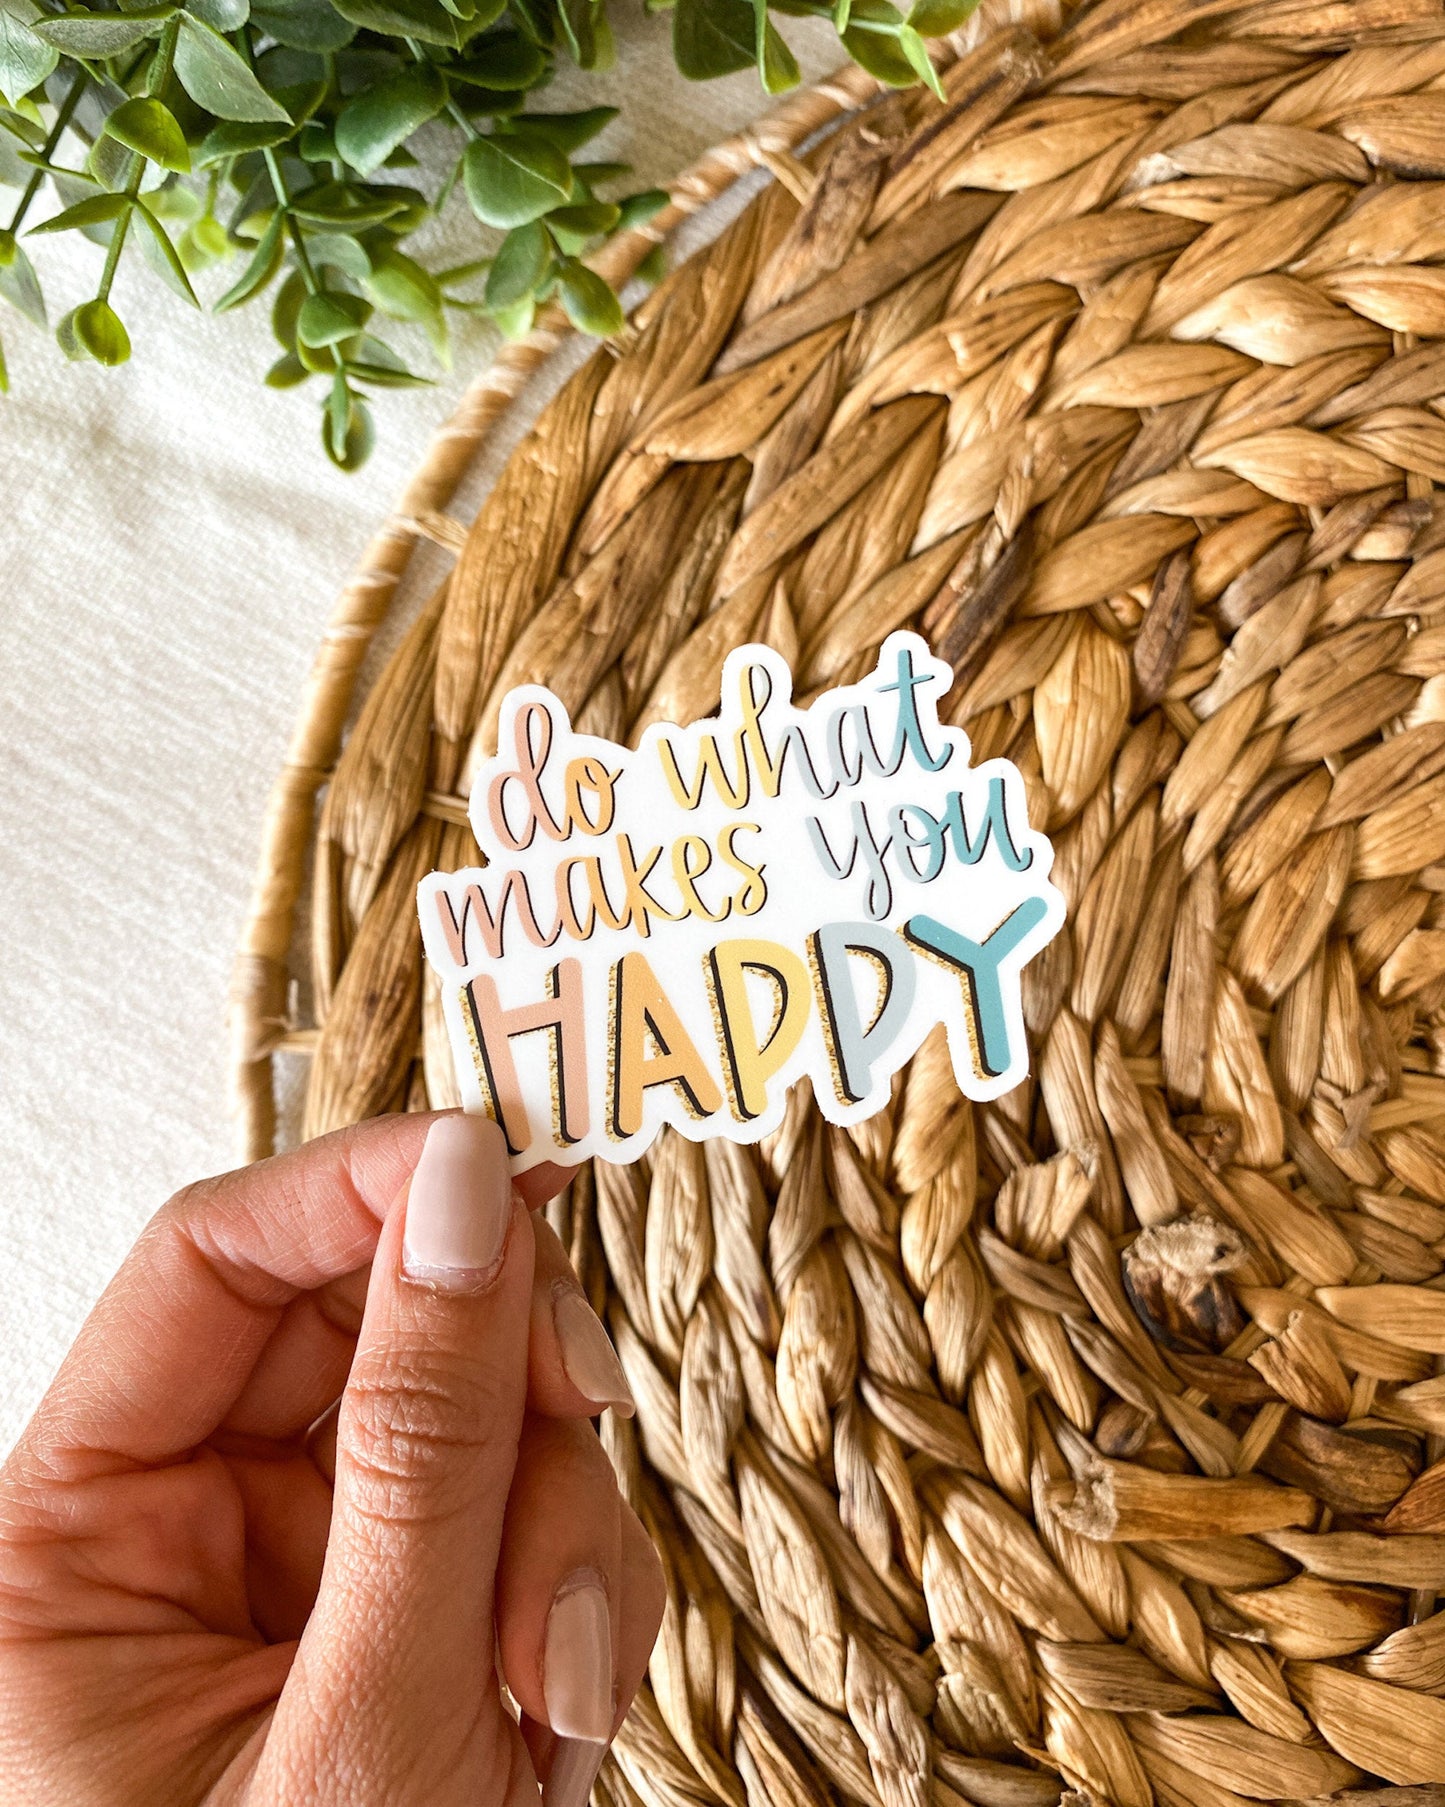 Do What Makes You Happy Sticker